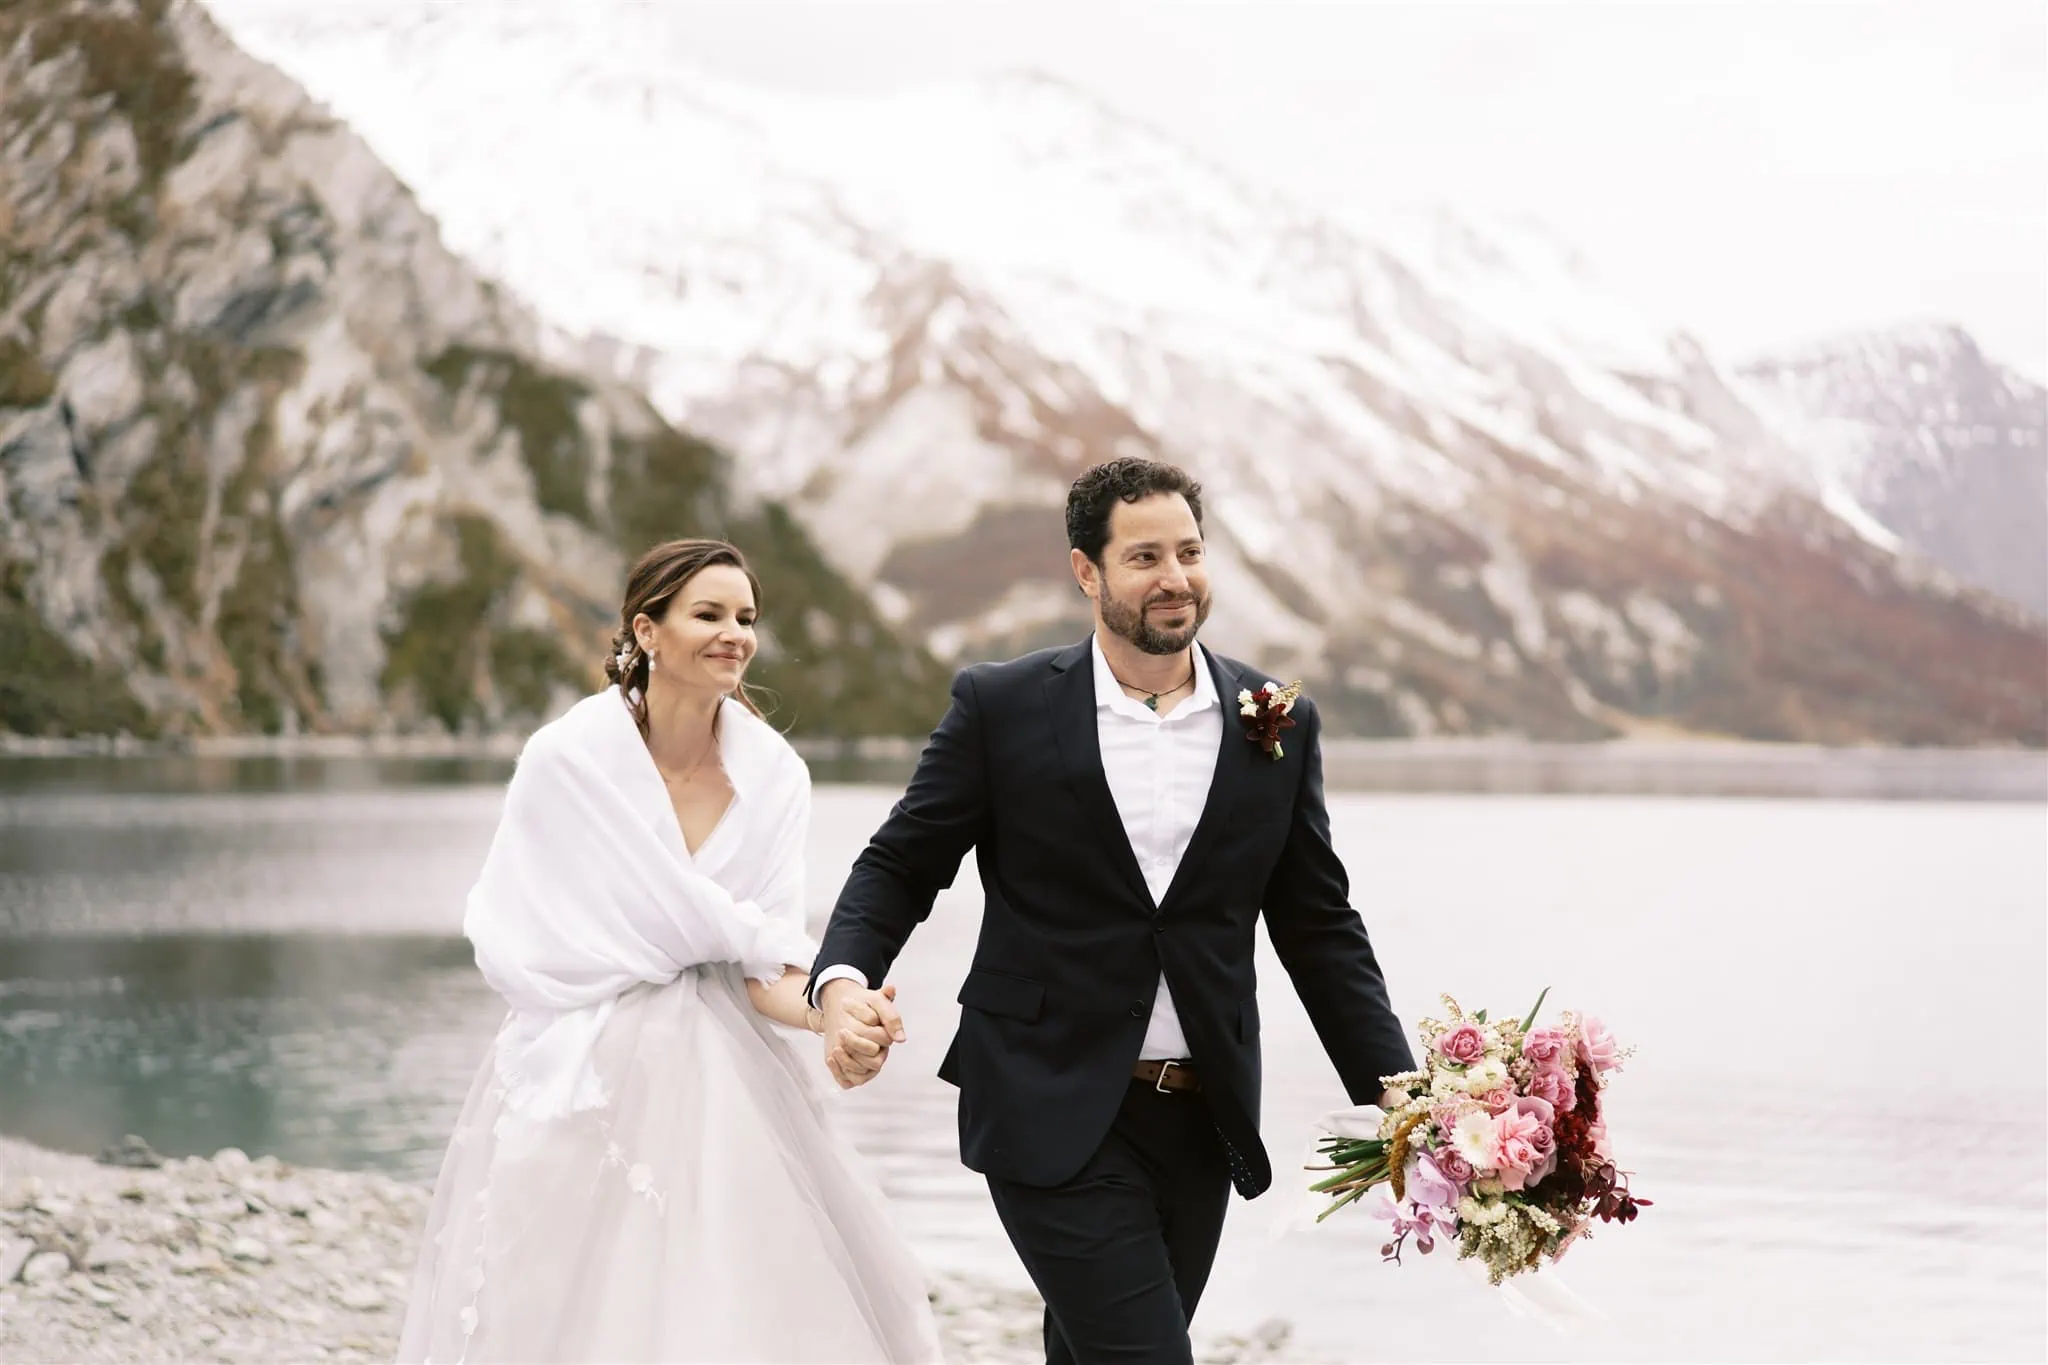 Queenstown New Zealand Elopement Wedding Photographer - A bride and groom stargazing by a lake in Queenstown, with mountains in the background.